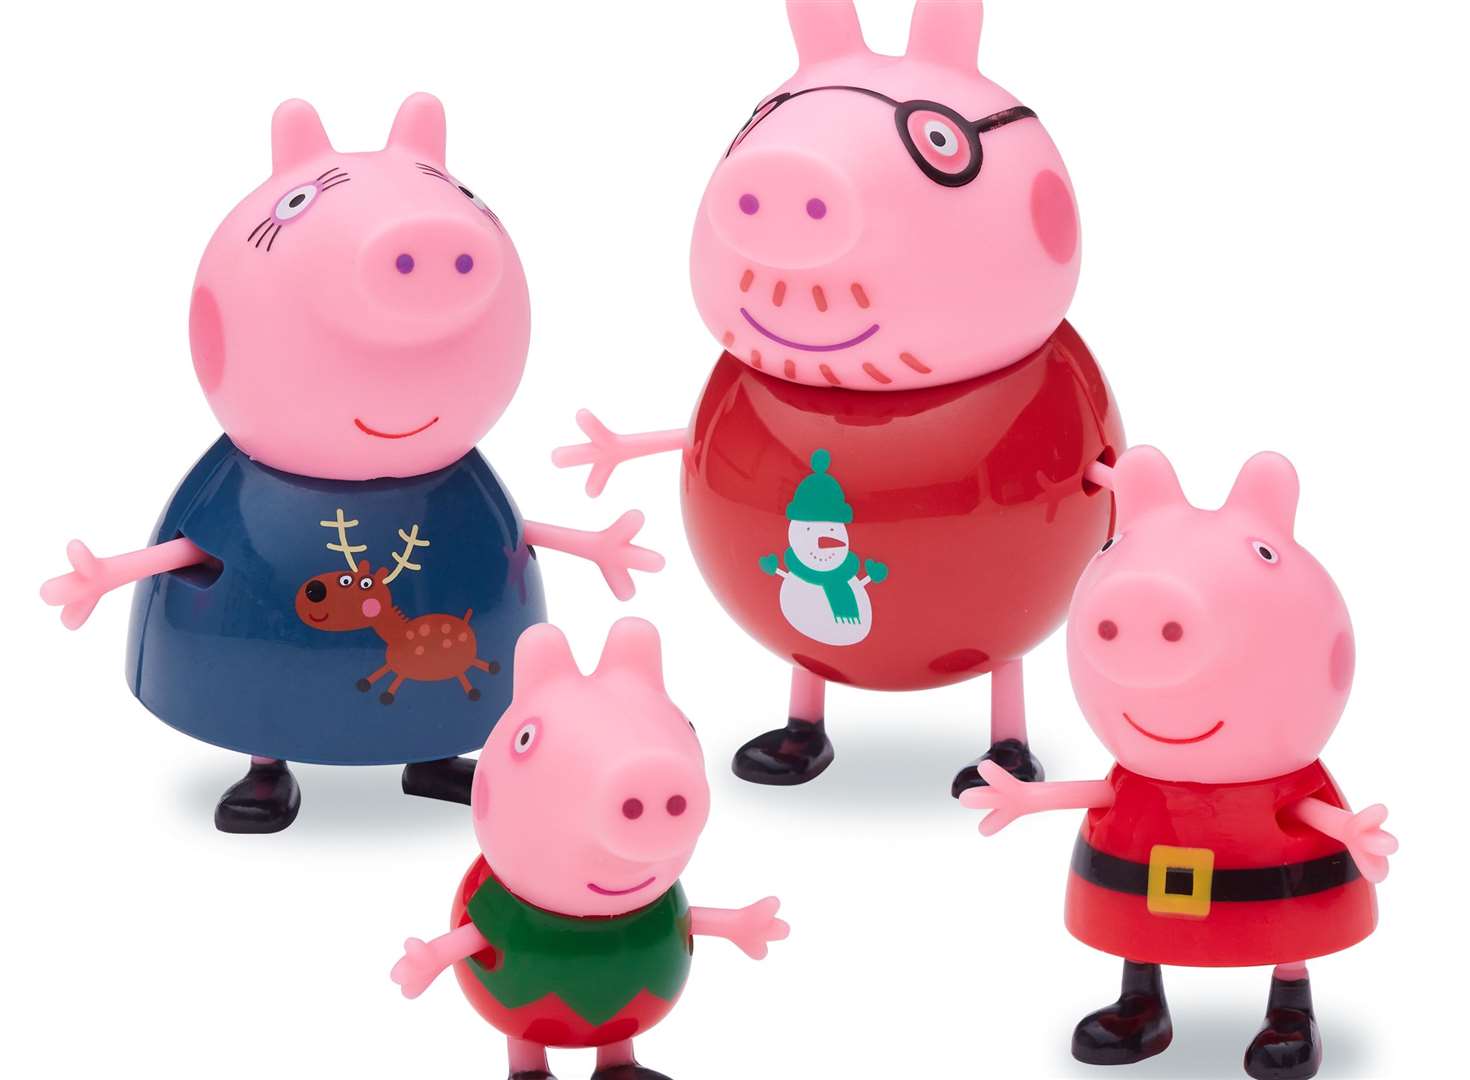 To celebrate Save the Children’s Christmas Jumper Day, The Entertainer is selling an exclusive, limited edition toy set of the Peppa Pig family - each wearing their own Christmas jumper